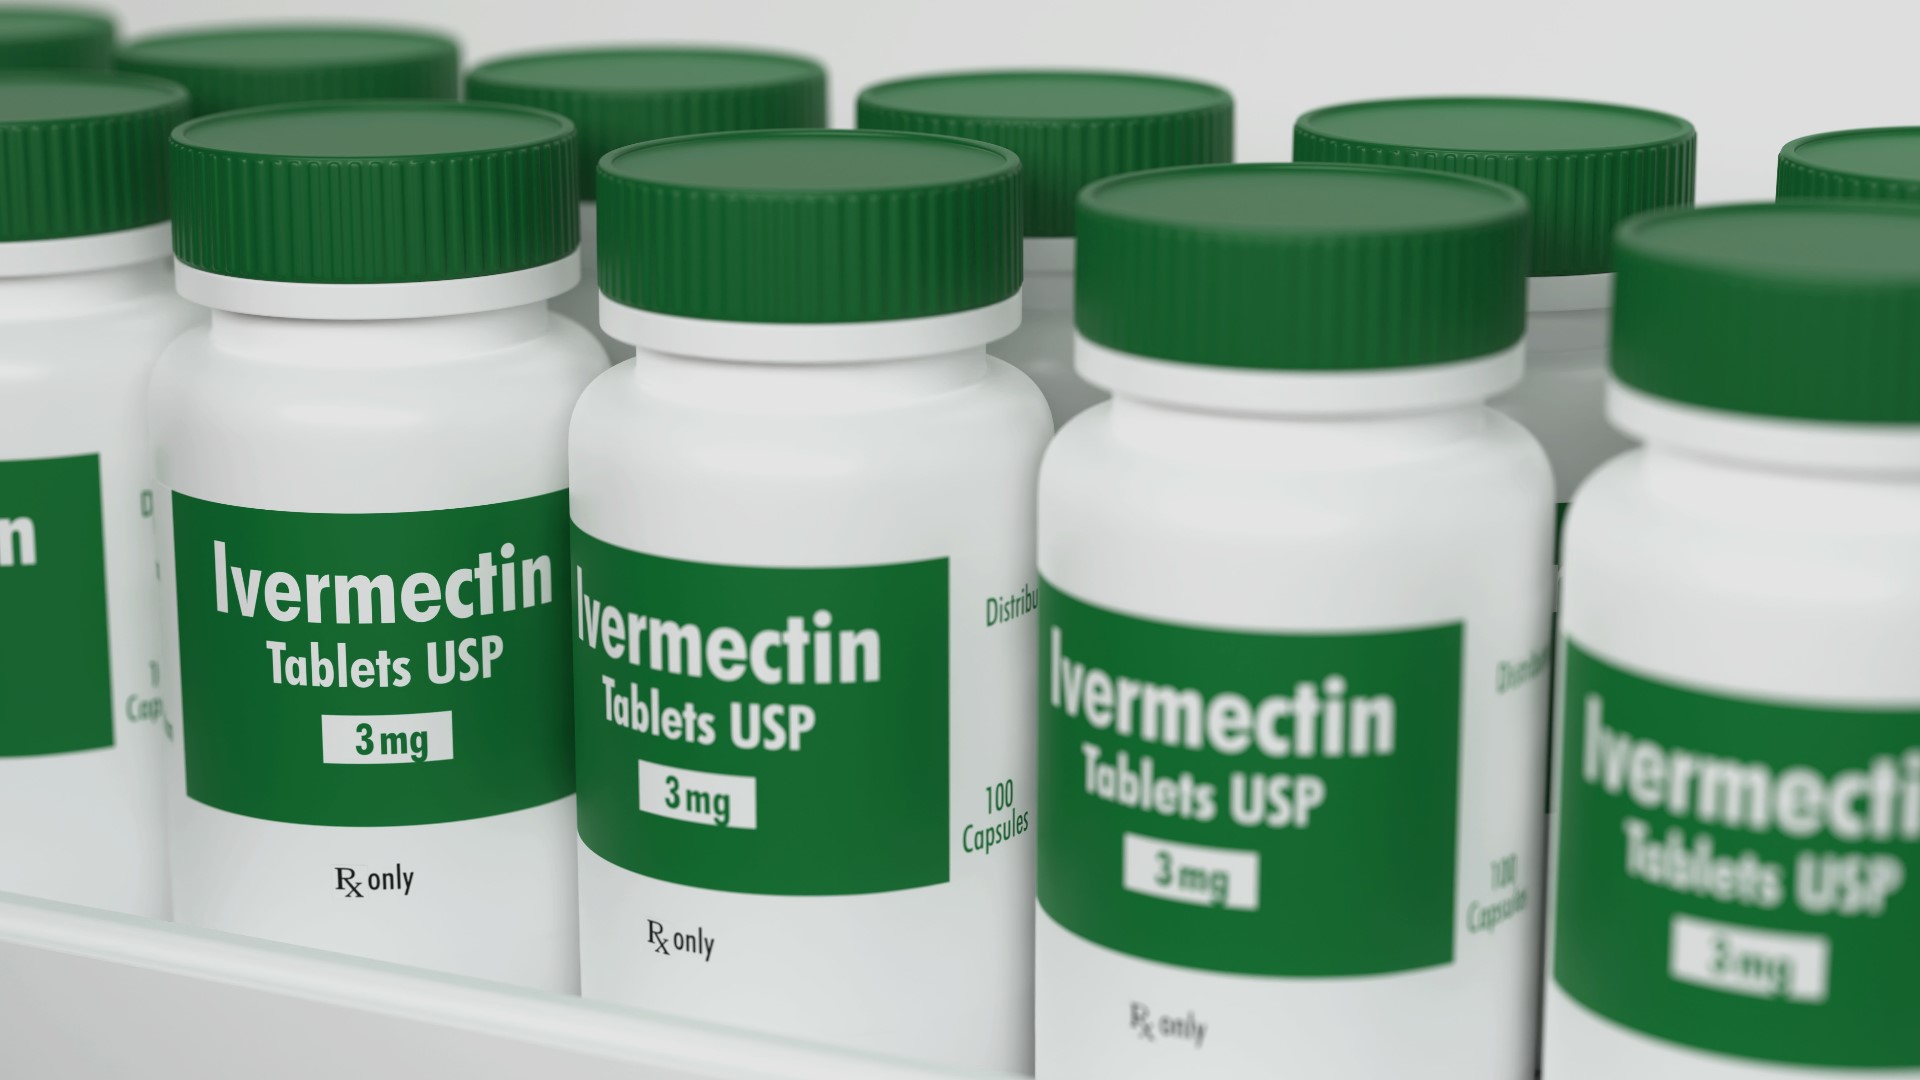 Despite a warning from the FDA, people across the U.S. have been taking Ivermectin, a drug used for deworming livestock, to treat COVID-19.